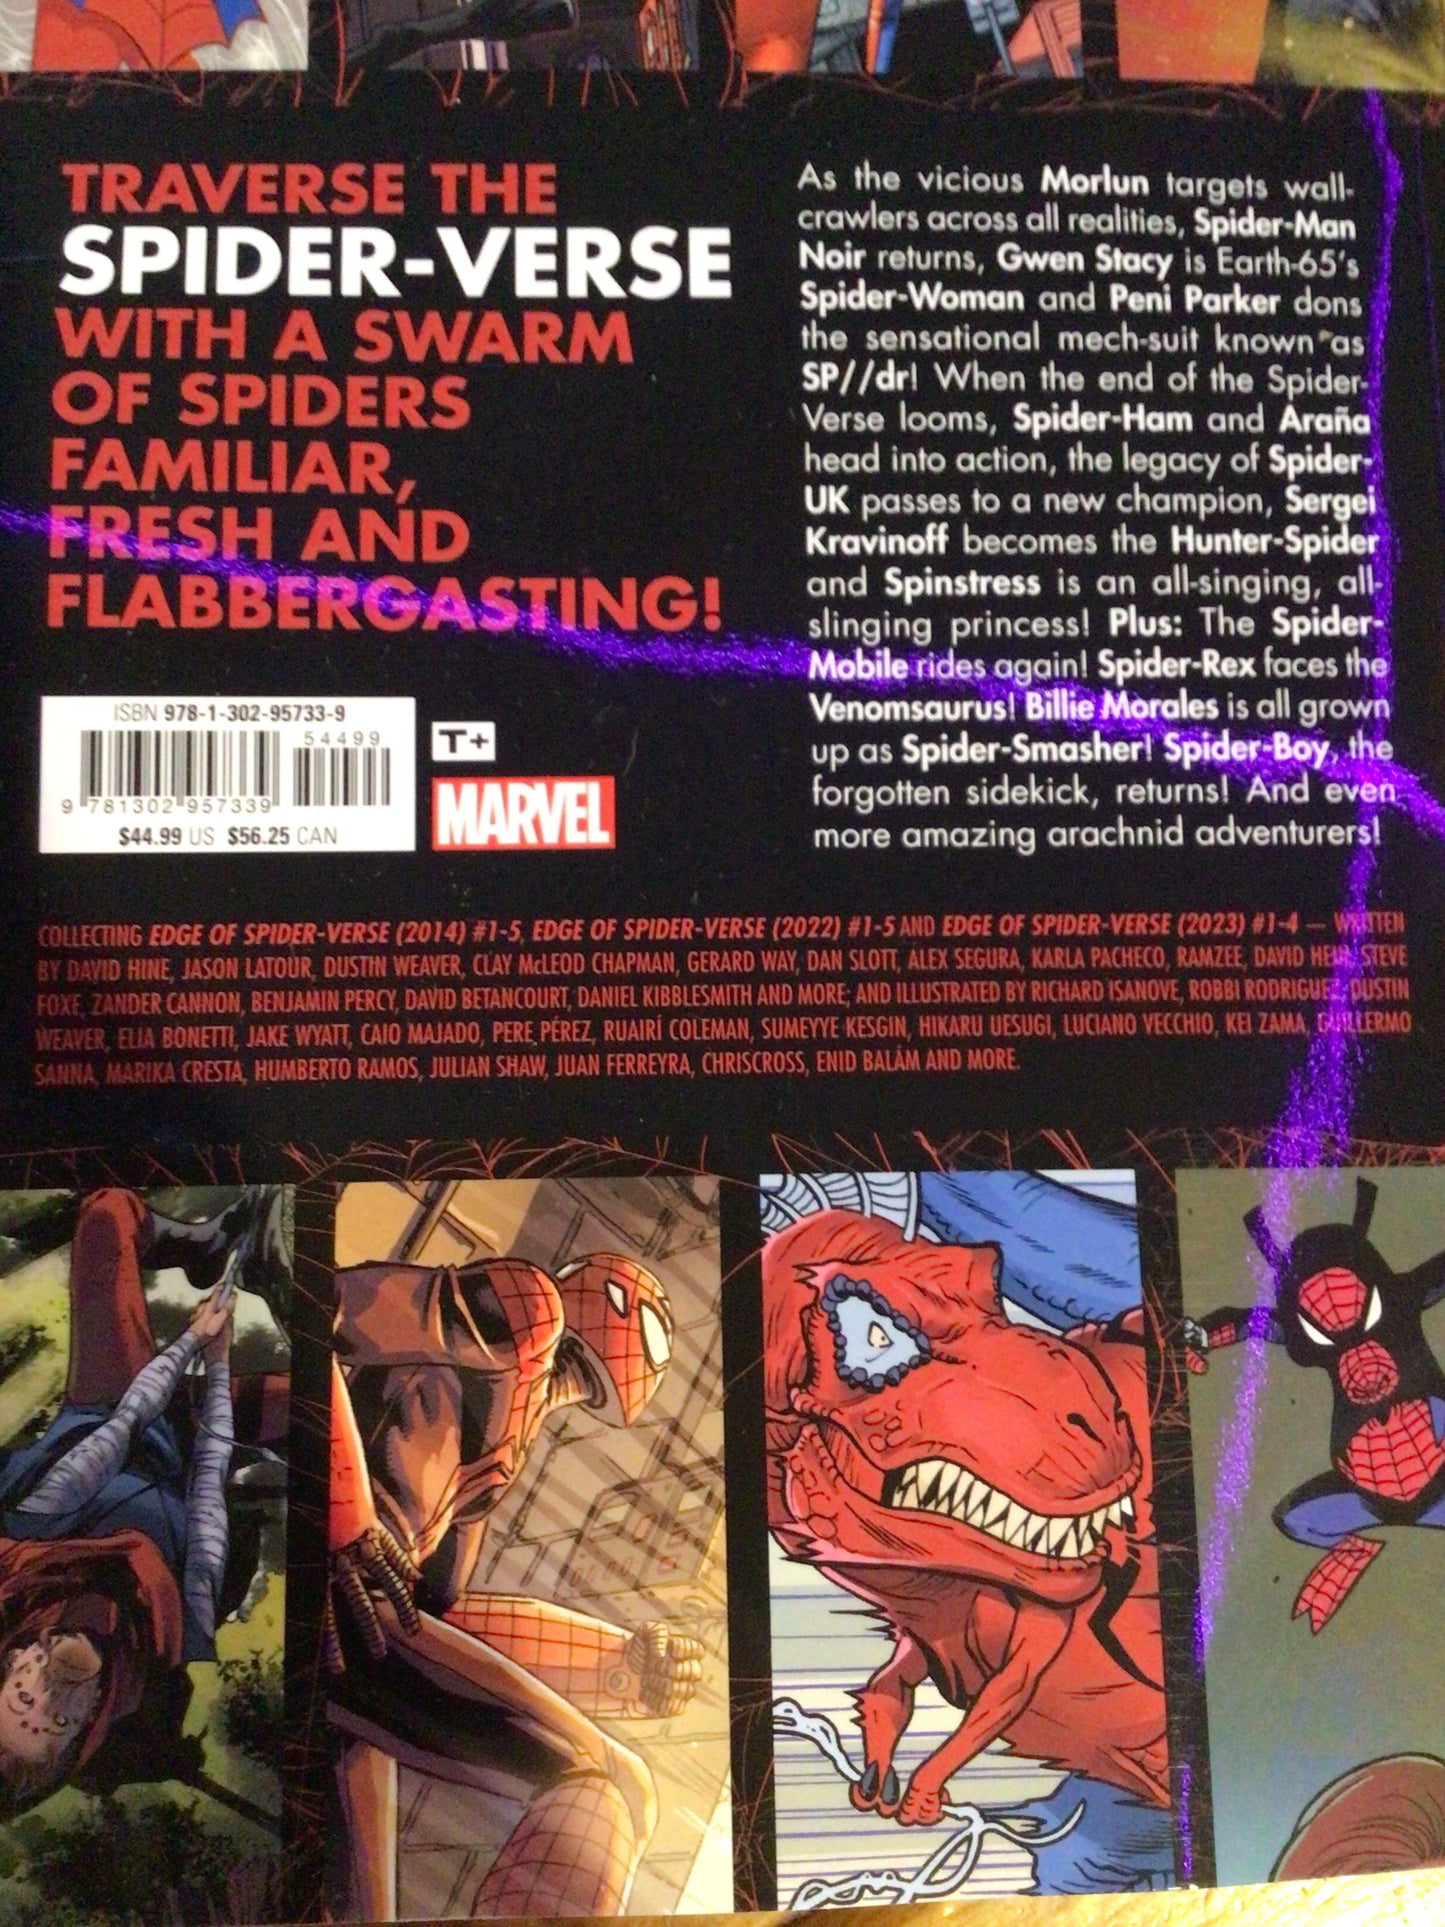 Spider-Verse Across the Multiverse Graphic Novel